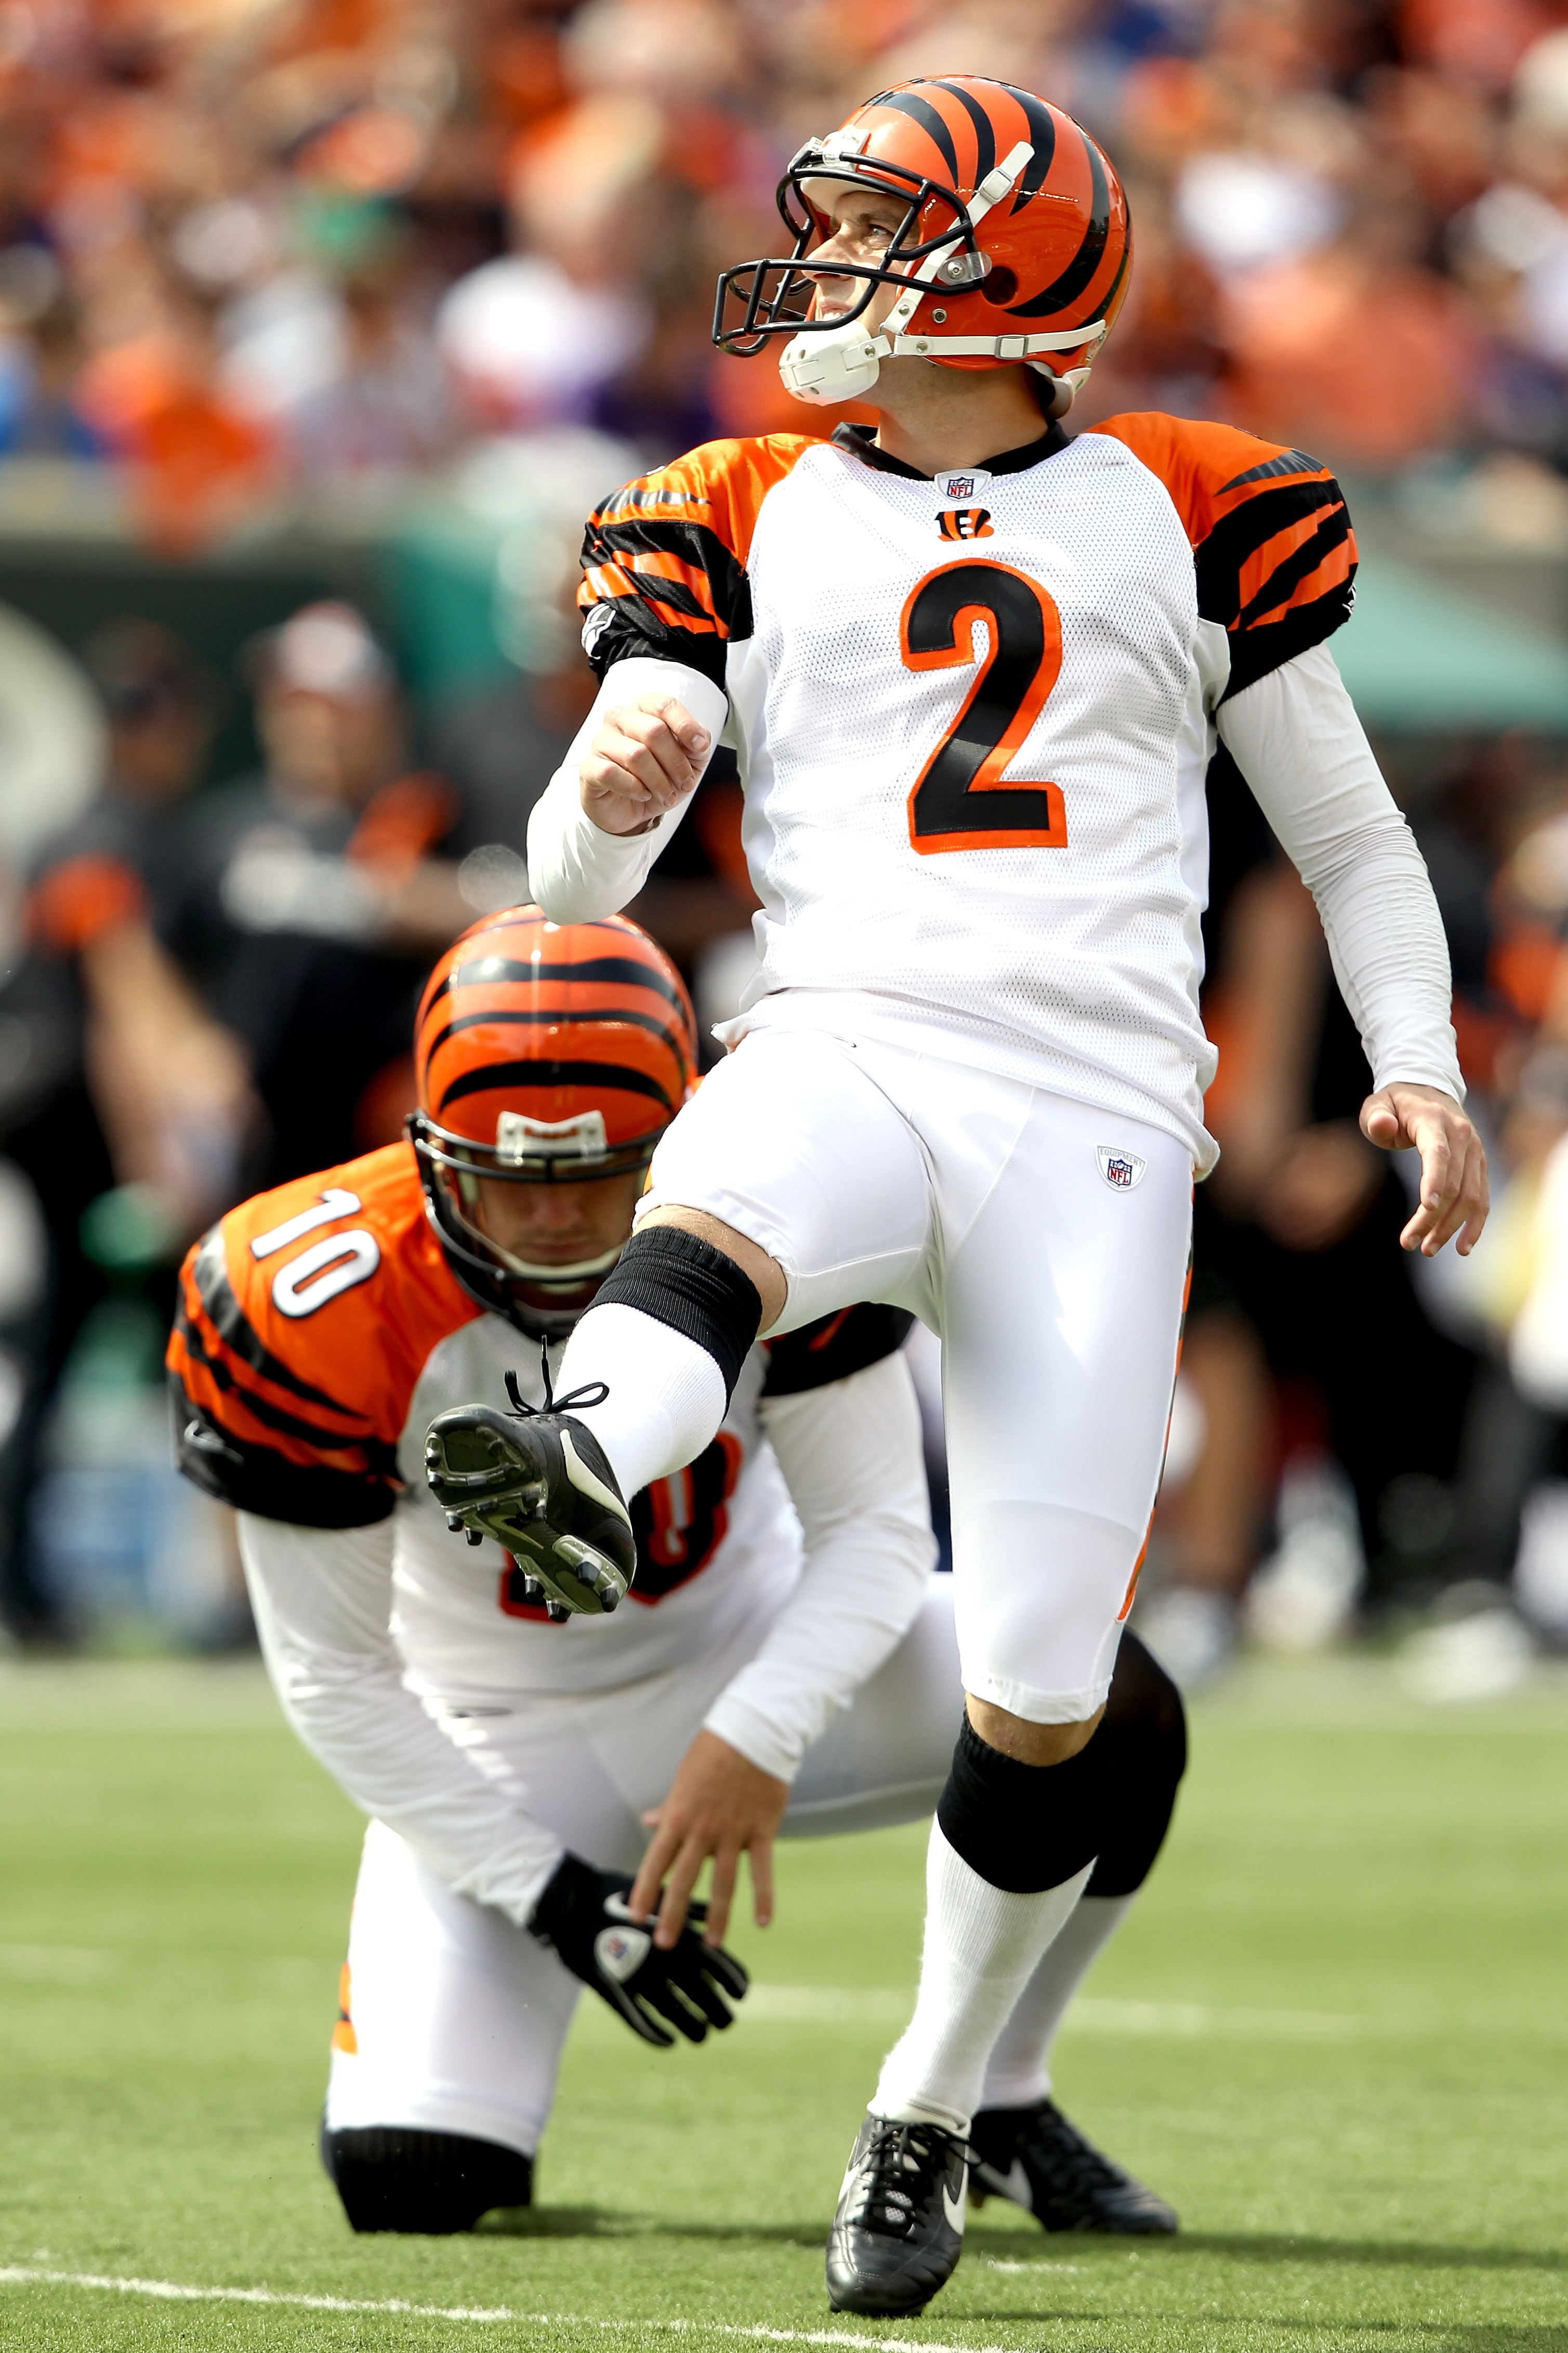 CINCINNATI - SEPTEMBER 19: Mike Nugent #2 of the Cincinatti Bengals kicks a field goal against the Baltimore ravens at Paul Brown Stadium on September 19, 2010 in Cincinnati, Ohio. The holder is Kevin Huber #10.  (Photo by Matthew Stockman/Getty Images)